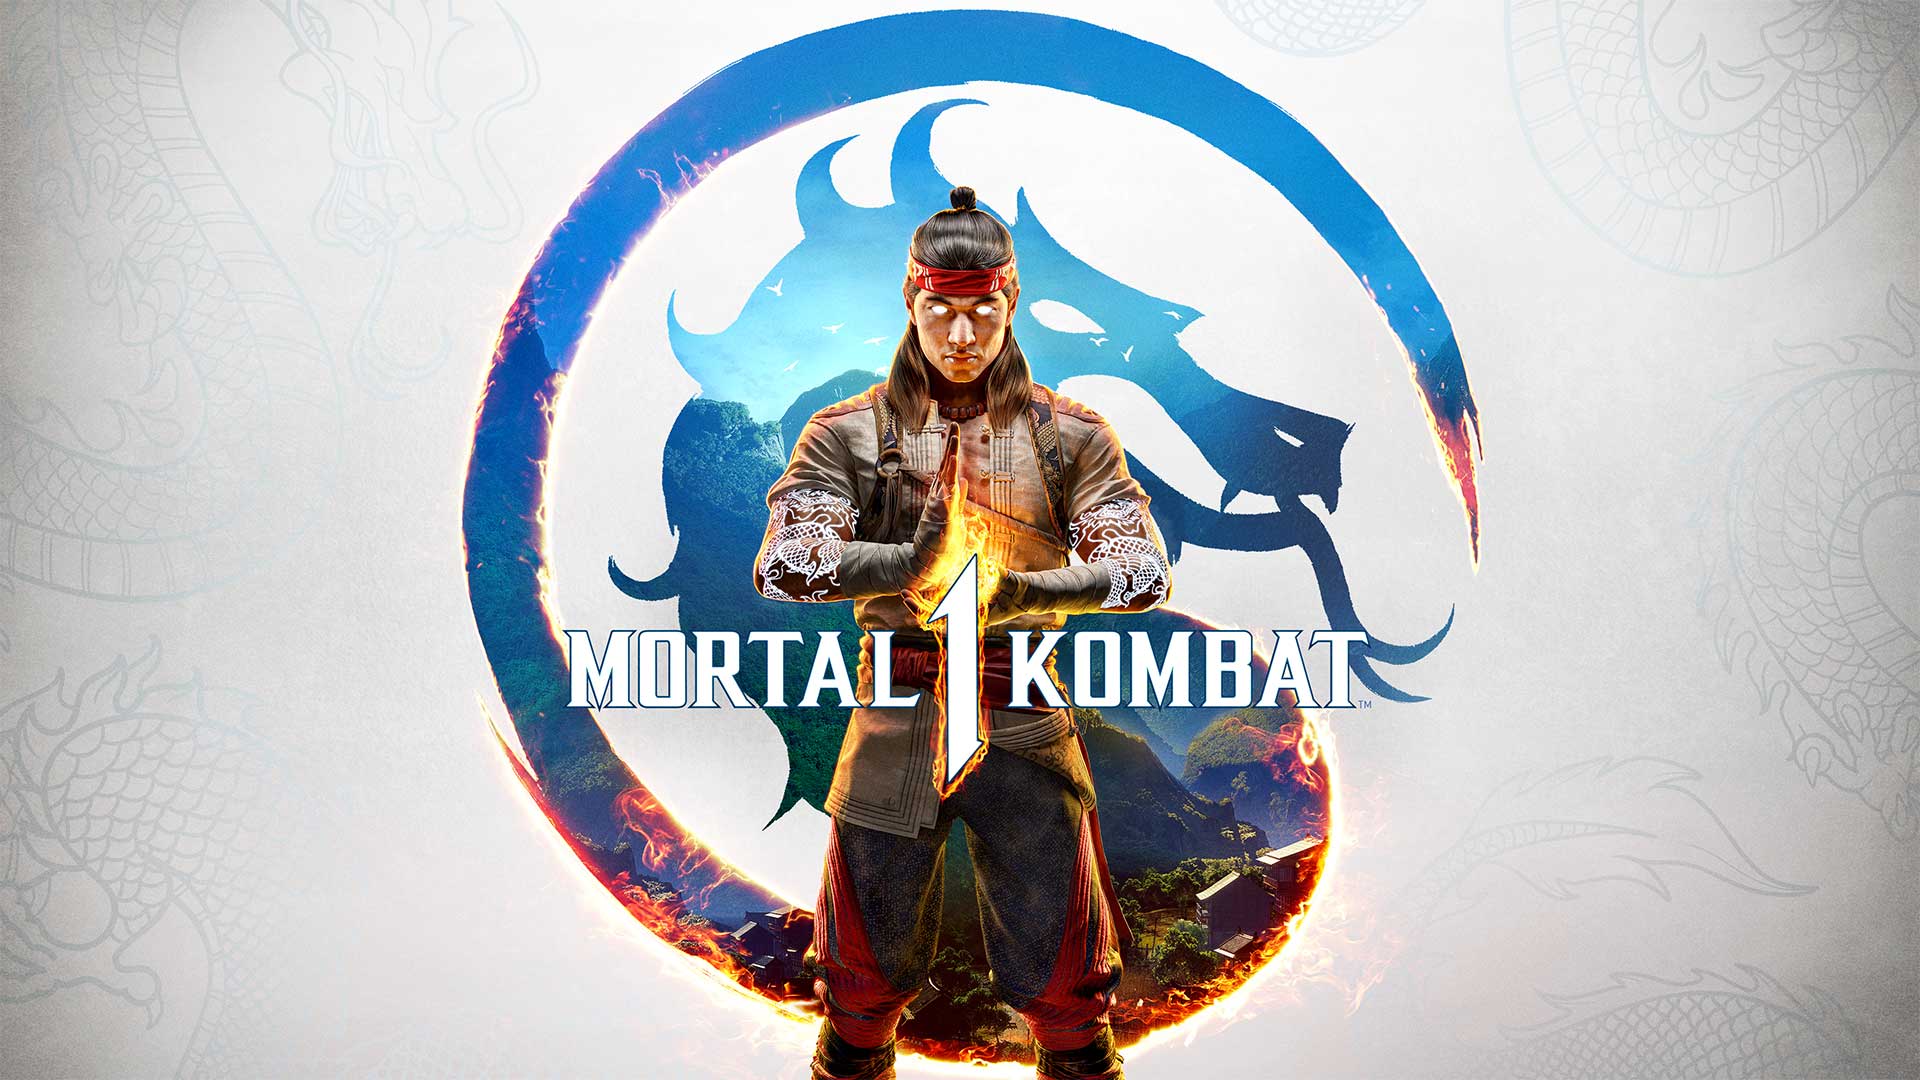 Mortal Kombat is announced and will be released on